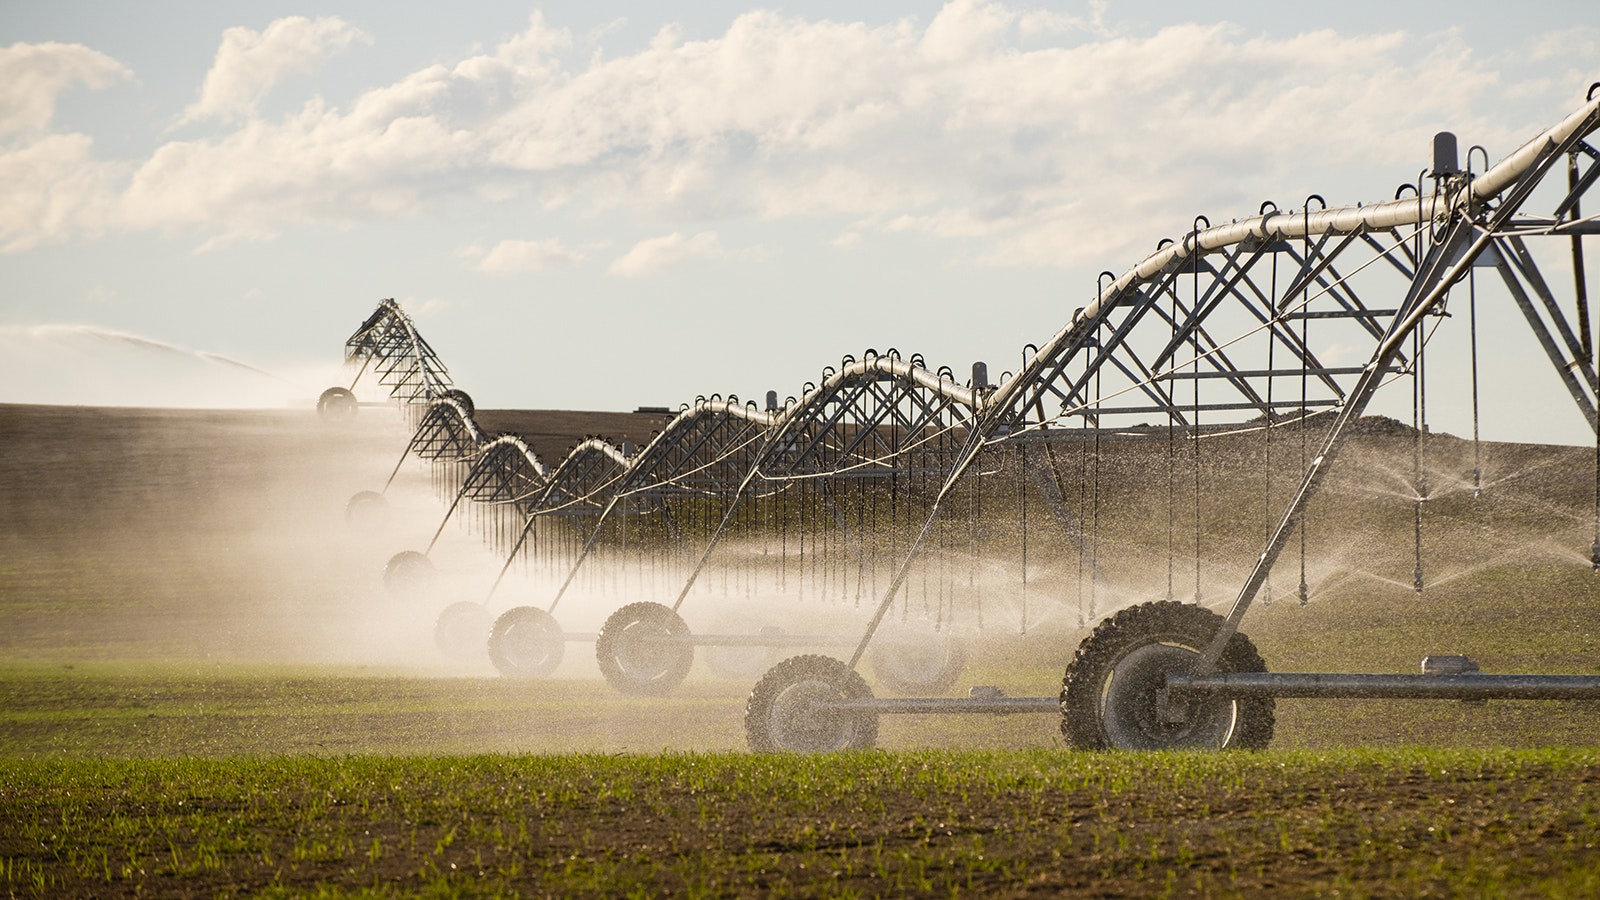 Pivot irrigation may be something Laramie County farmers will have trouble maintaining as Cheyenne's share of Colorado River water dwindles.